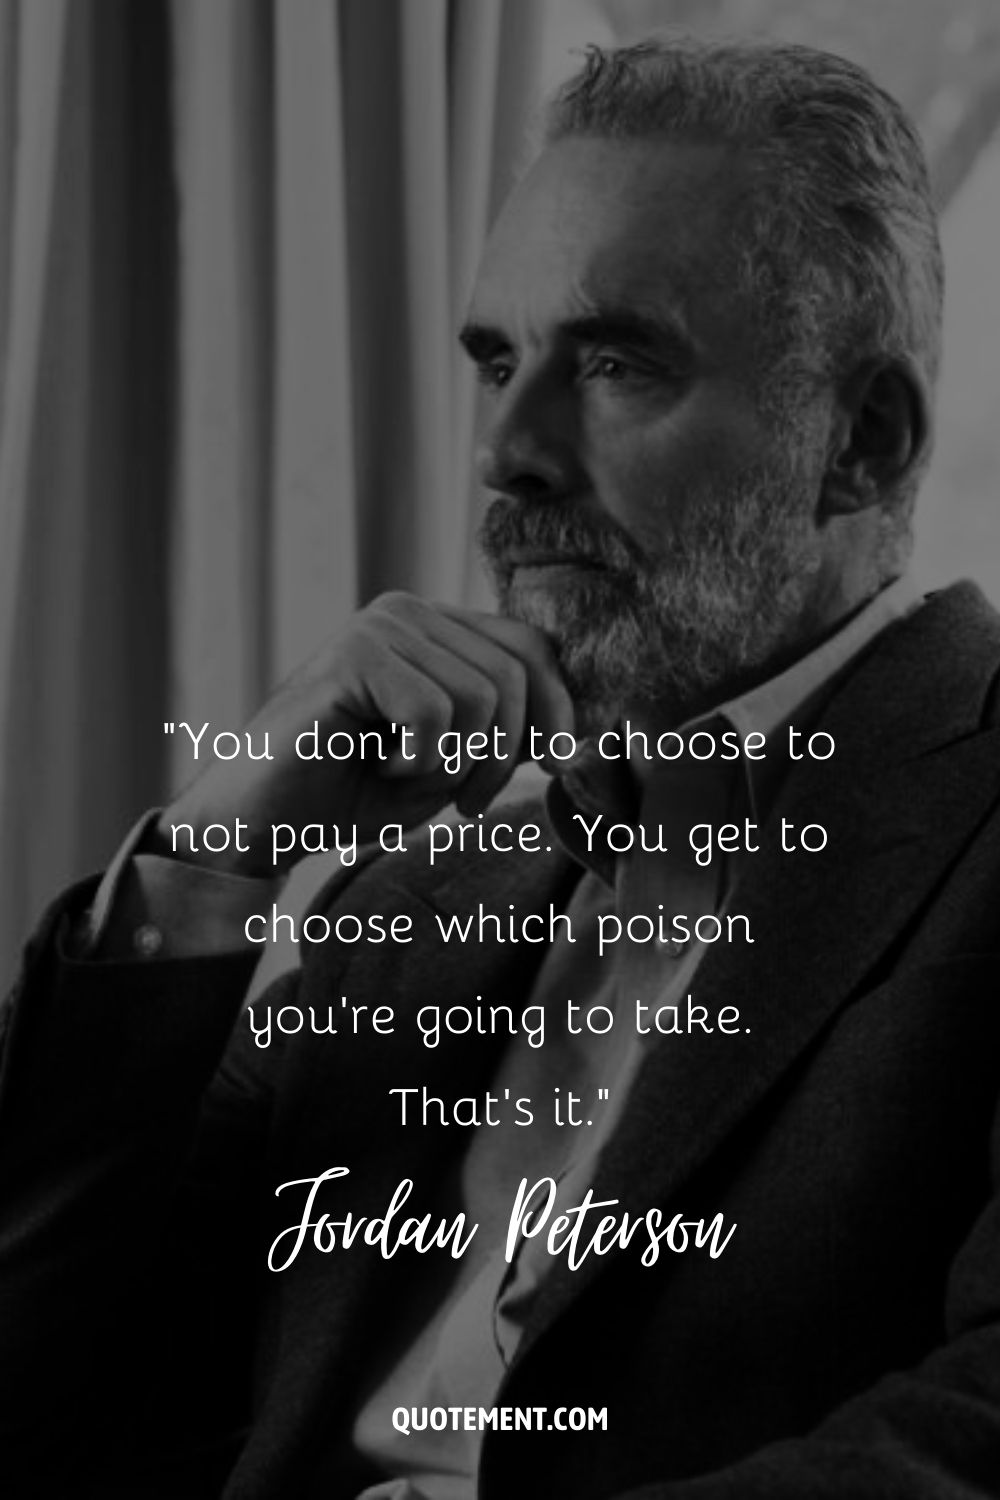 You don't get to choose to not pay a price. You get to choose which poison you're going to take. That's it.